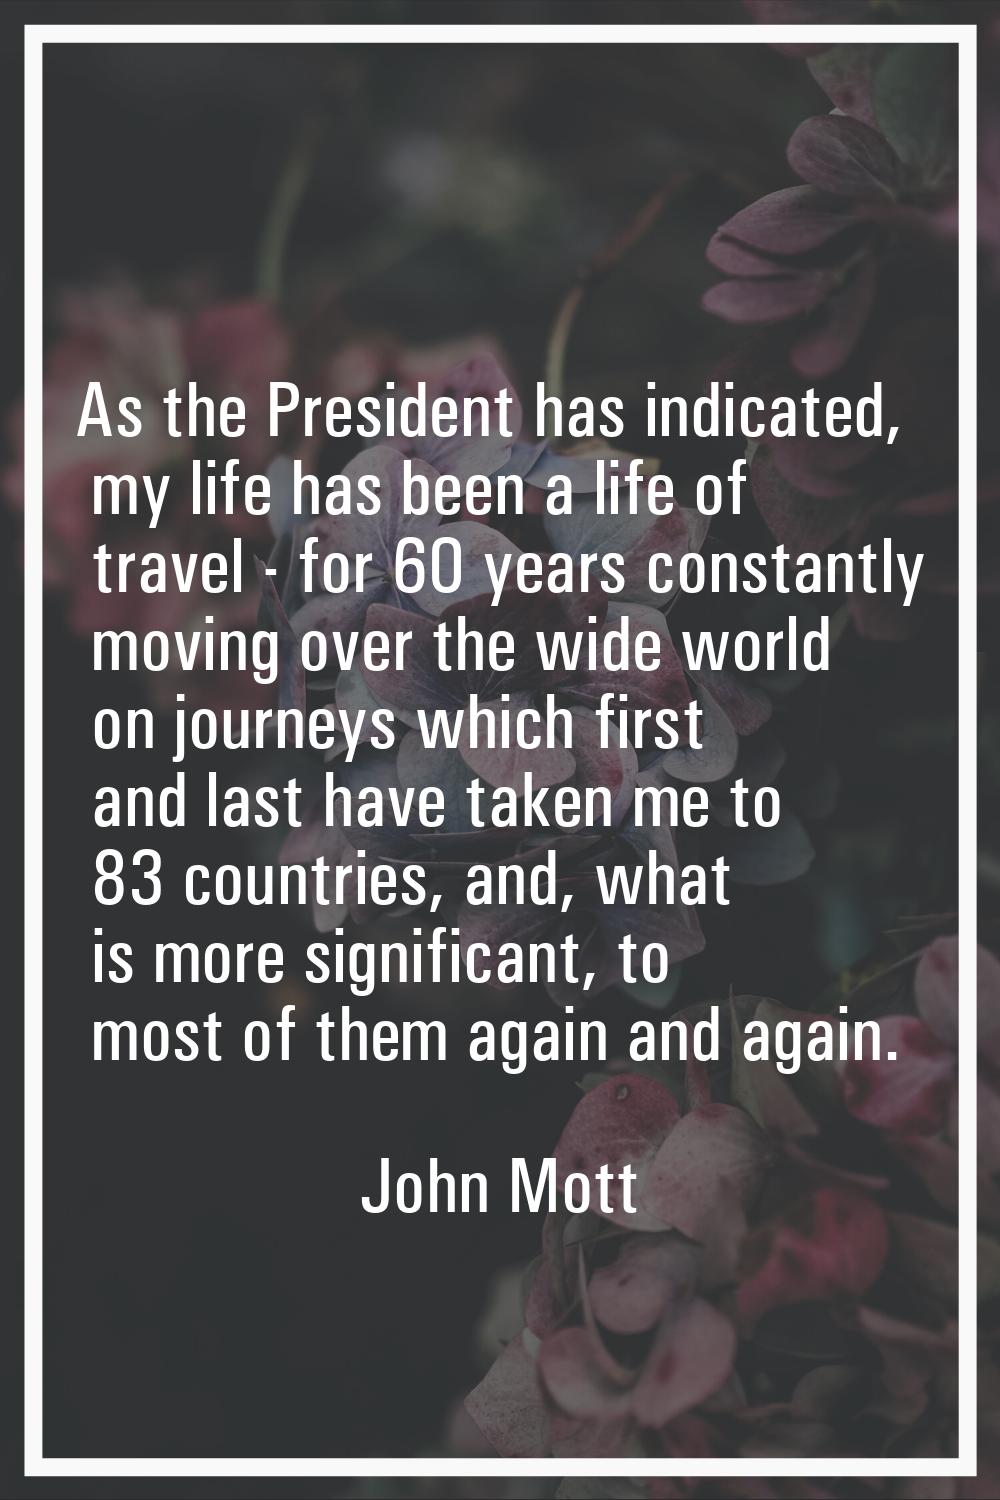 As the President has indicated, my life has been a life of travel - for 60 years constantly moving 